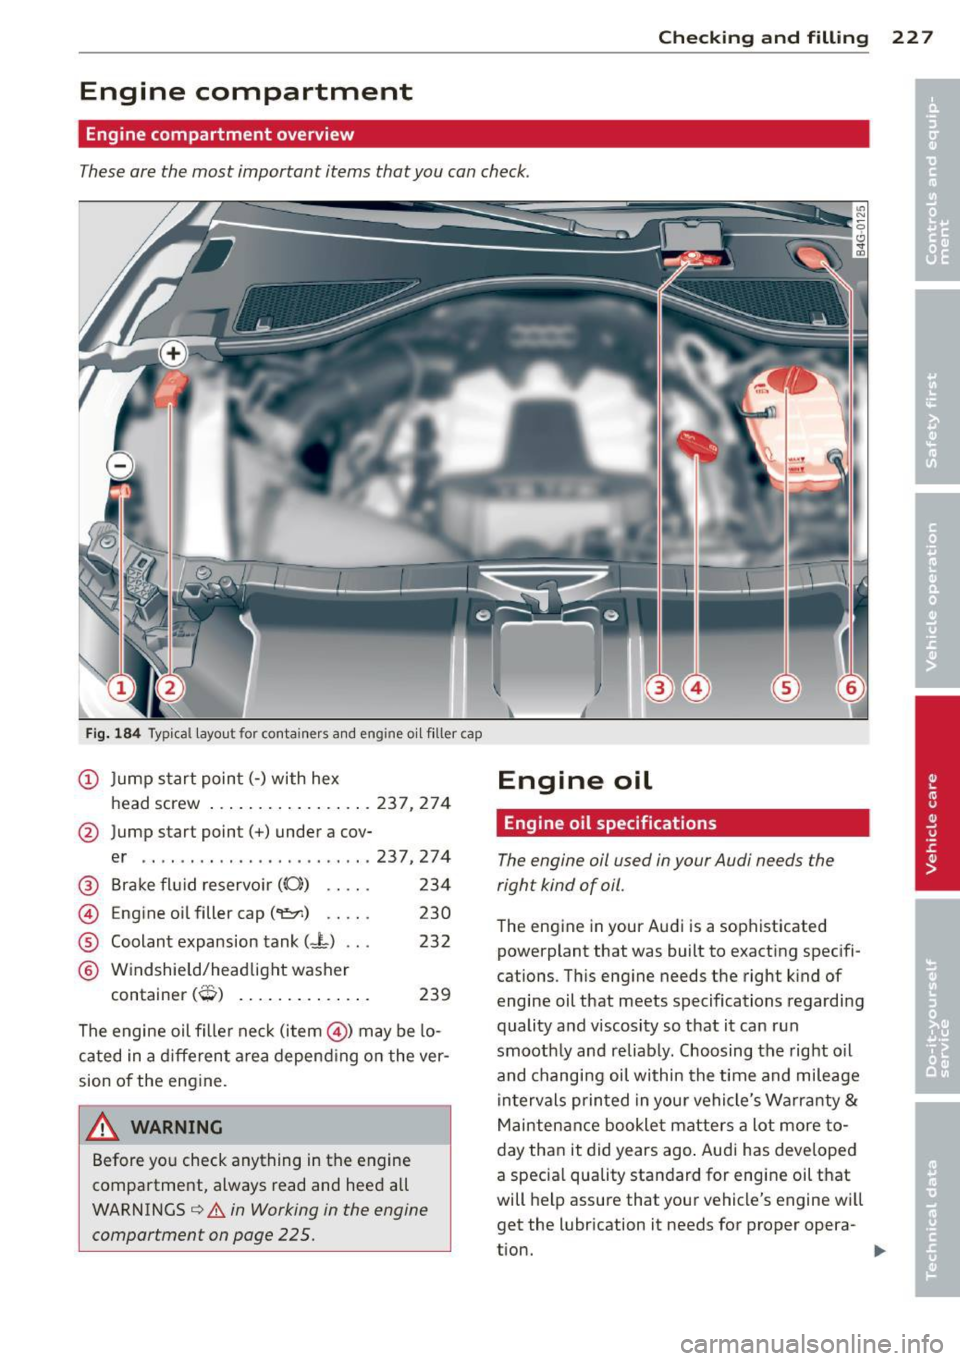 AUDI S6 2013  Owners Manual Checking  and  filling  22 7 
Engine  compartment 
Engine compartment  overview 
These are  the  most  important  items  that  you  can check. 
Fig. 184 Typical layout  for  conta iners  and  engine  